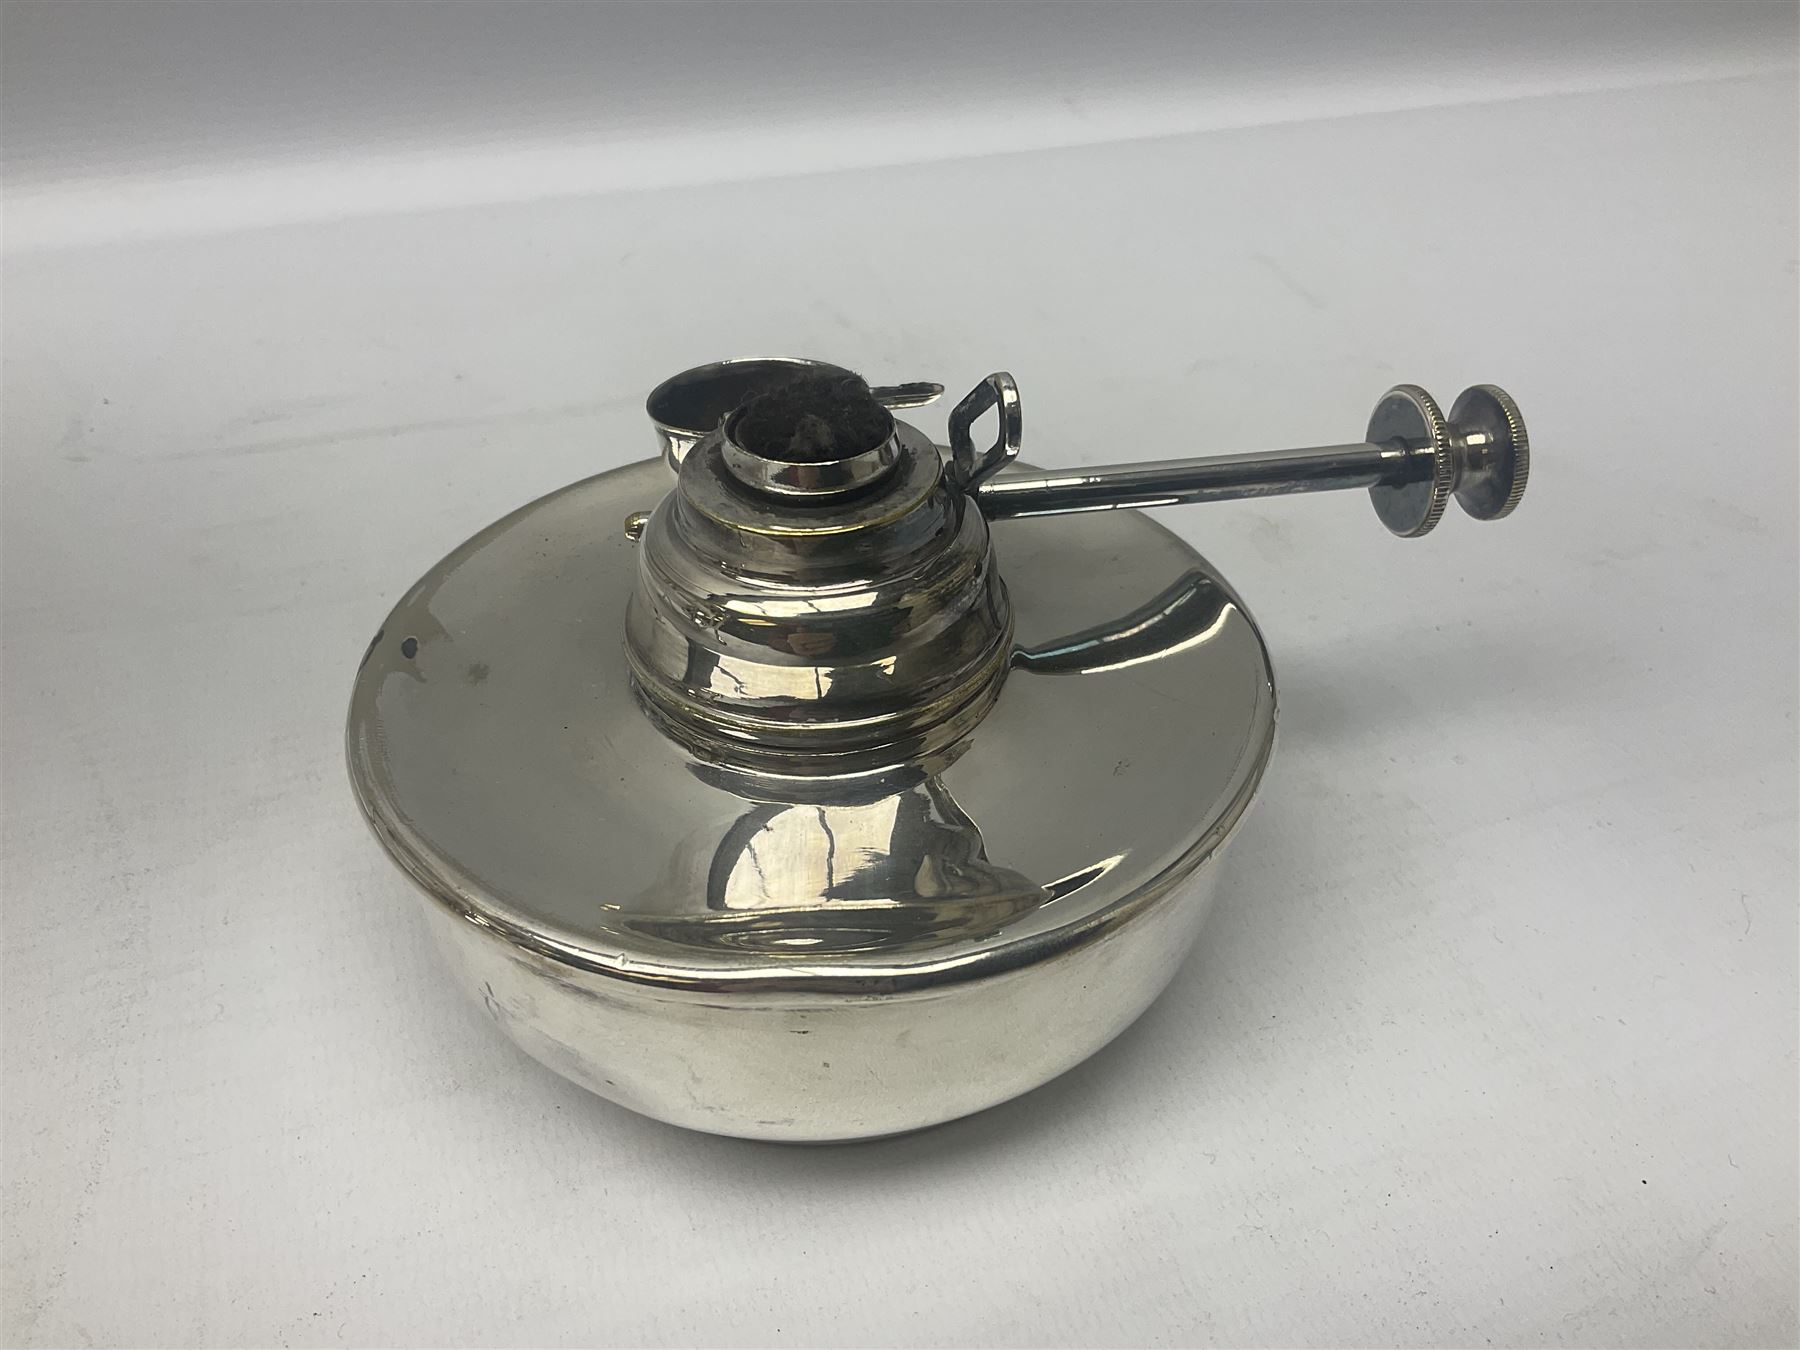 Walker & Hall silver plated long handled chafing dish - Image 13 of 18